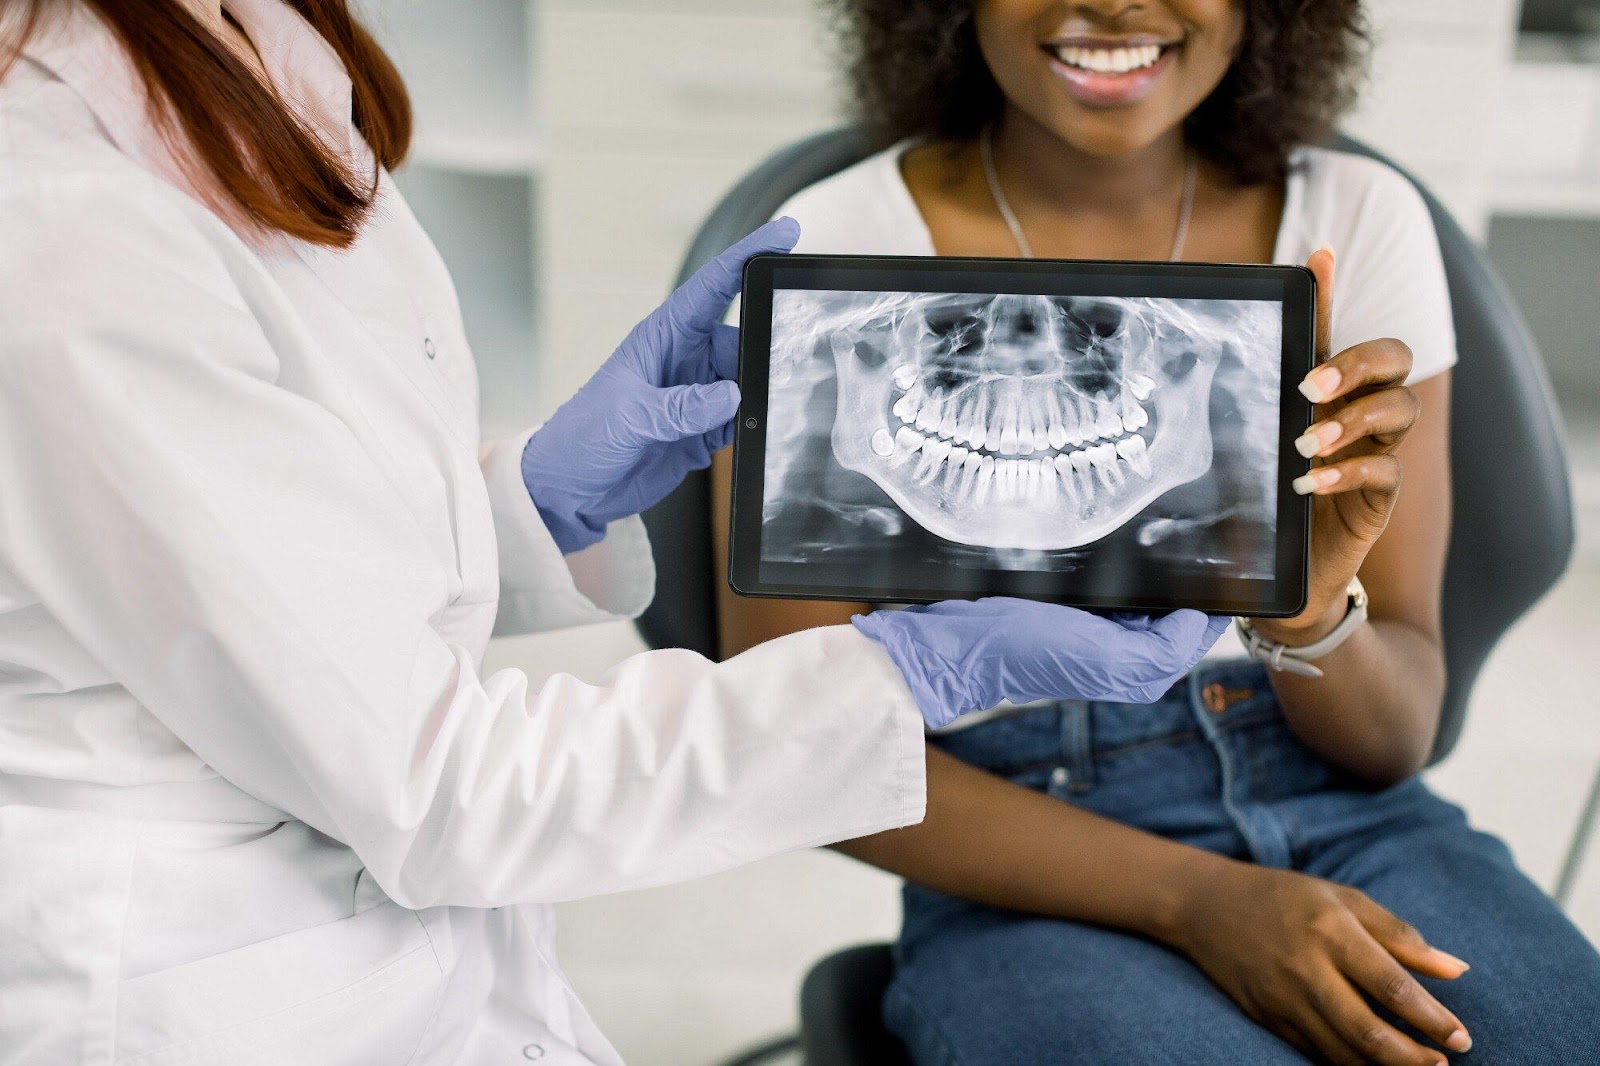 Is Comprehensive Orthodontic Treatment Right for You? A Complete Guide